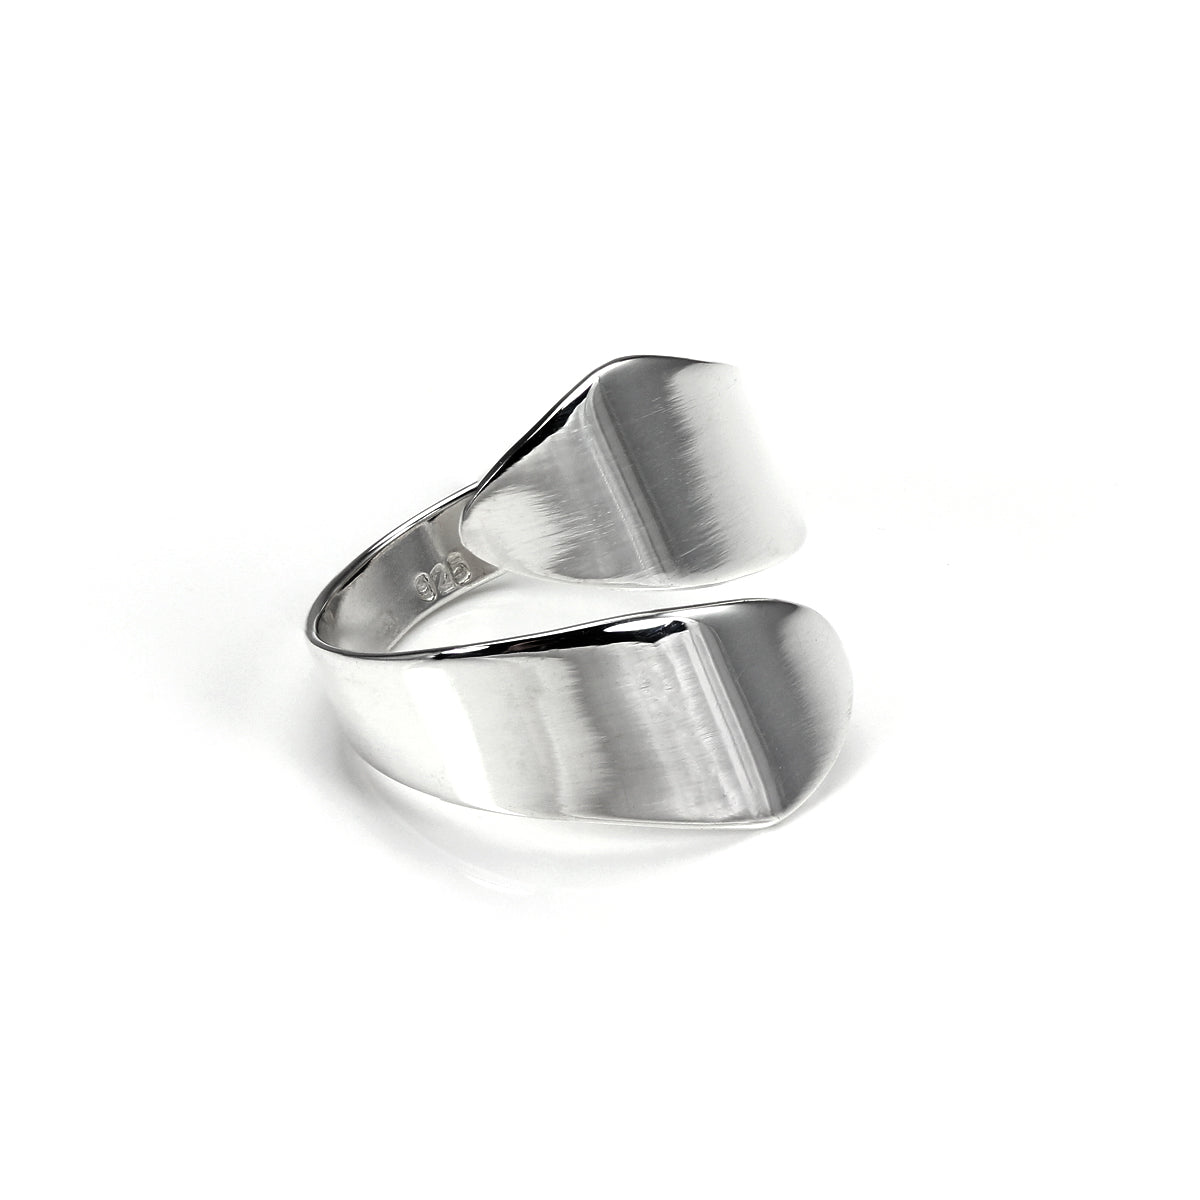 Sterling Silver Wide Adjustable Tapering Spiral Ring